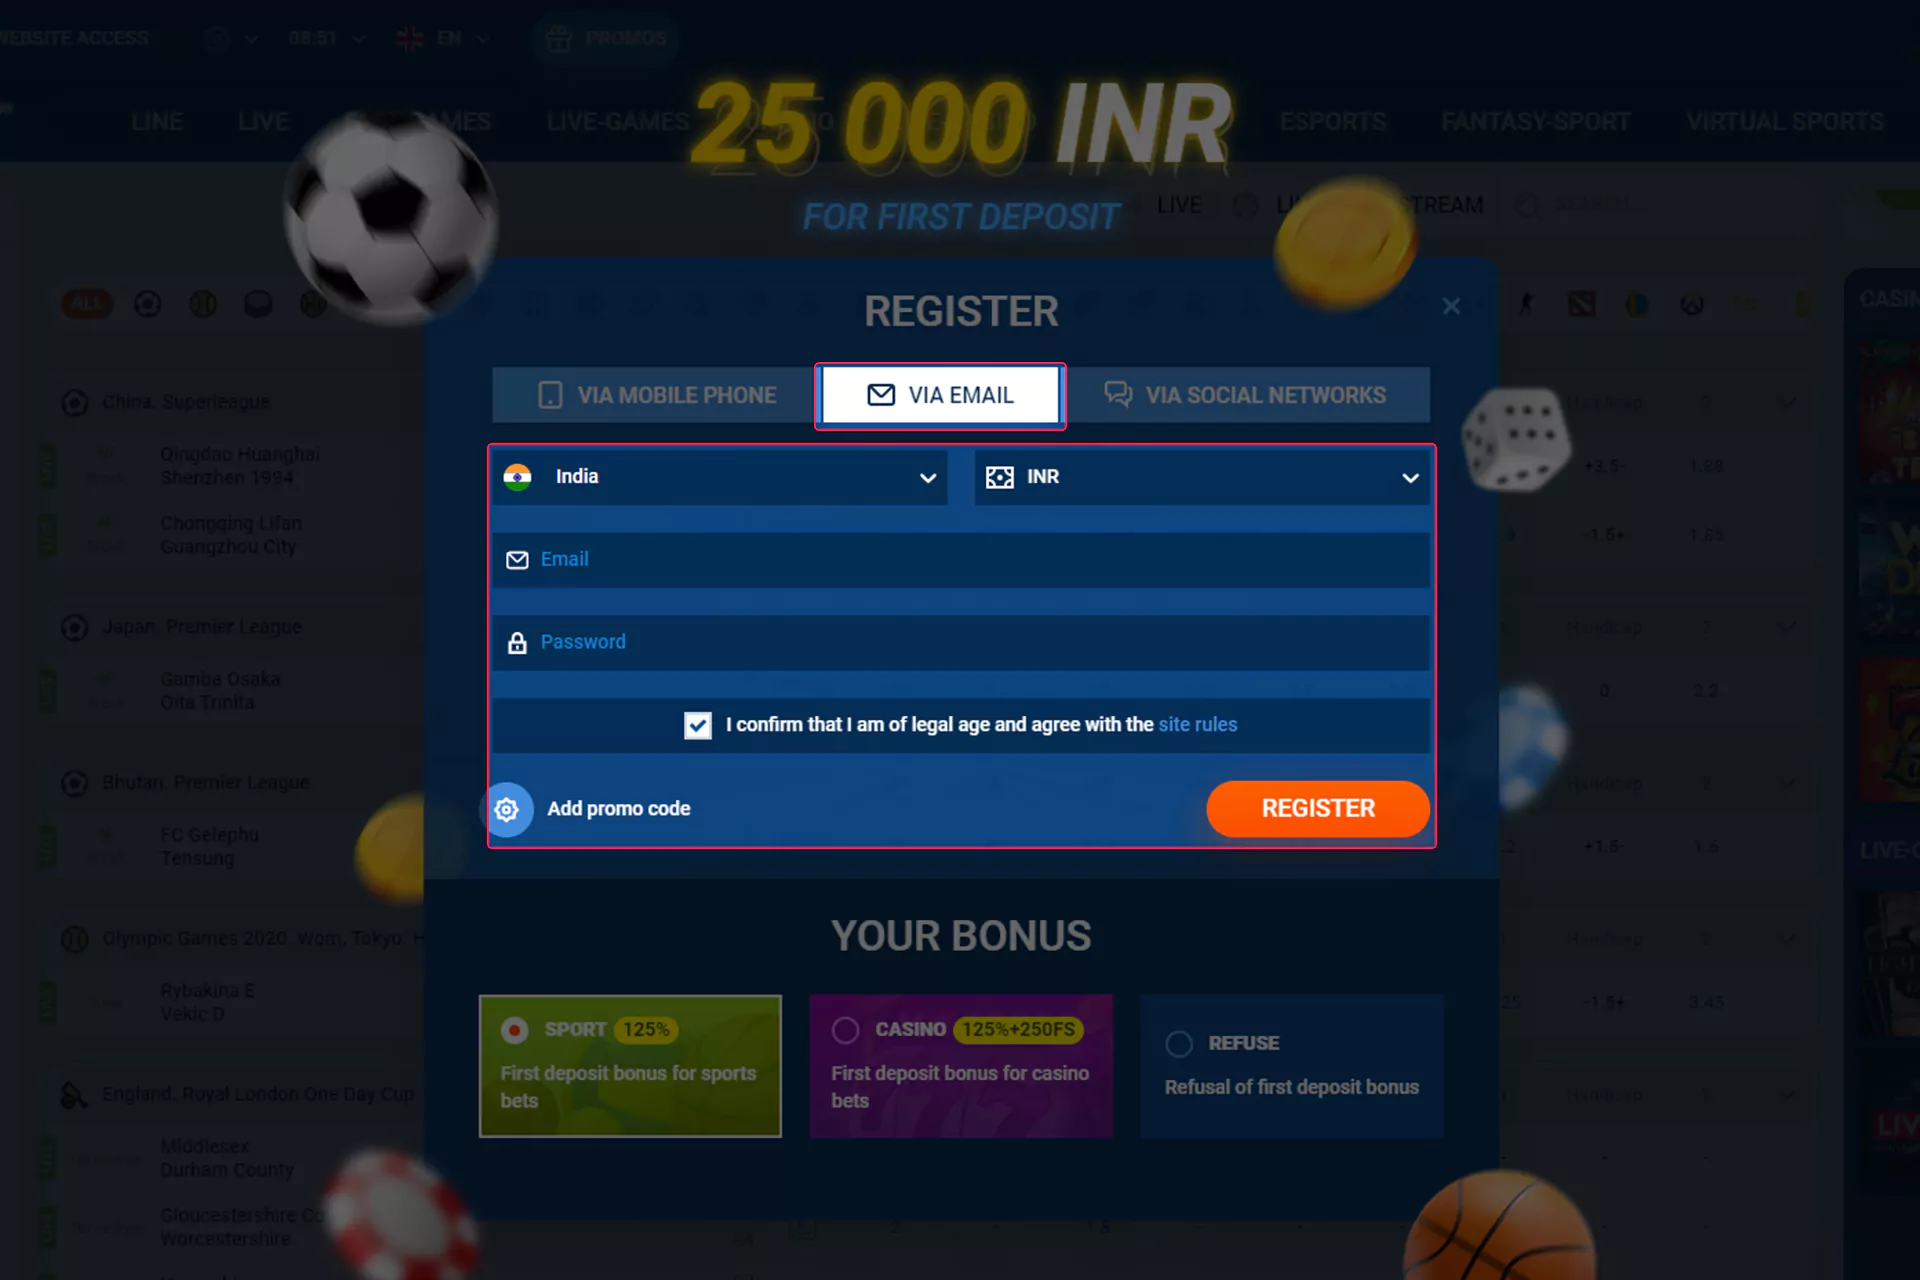 Registration via email is more comfortable if you use a PC or laptop for visiting betting sites.